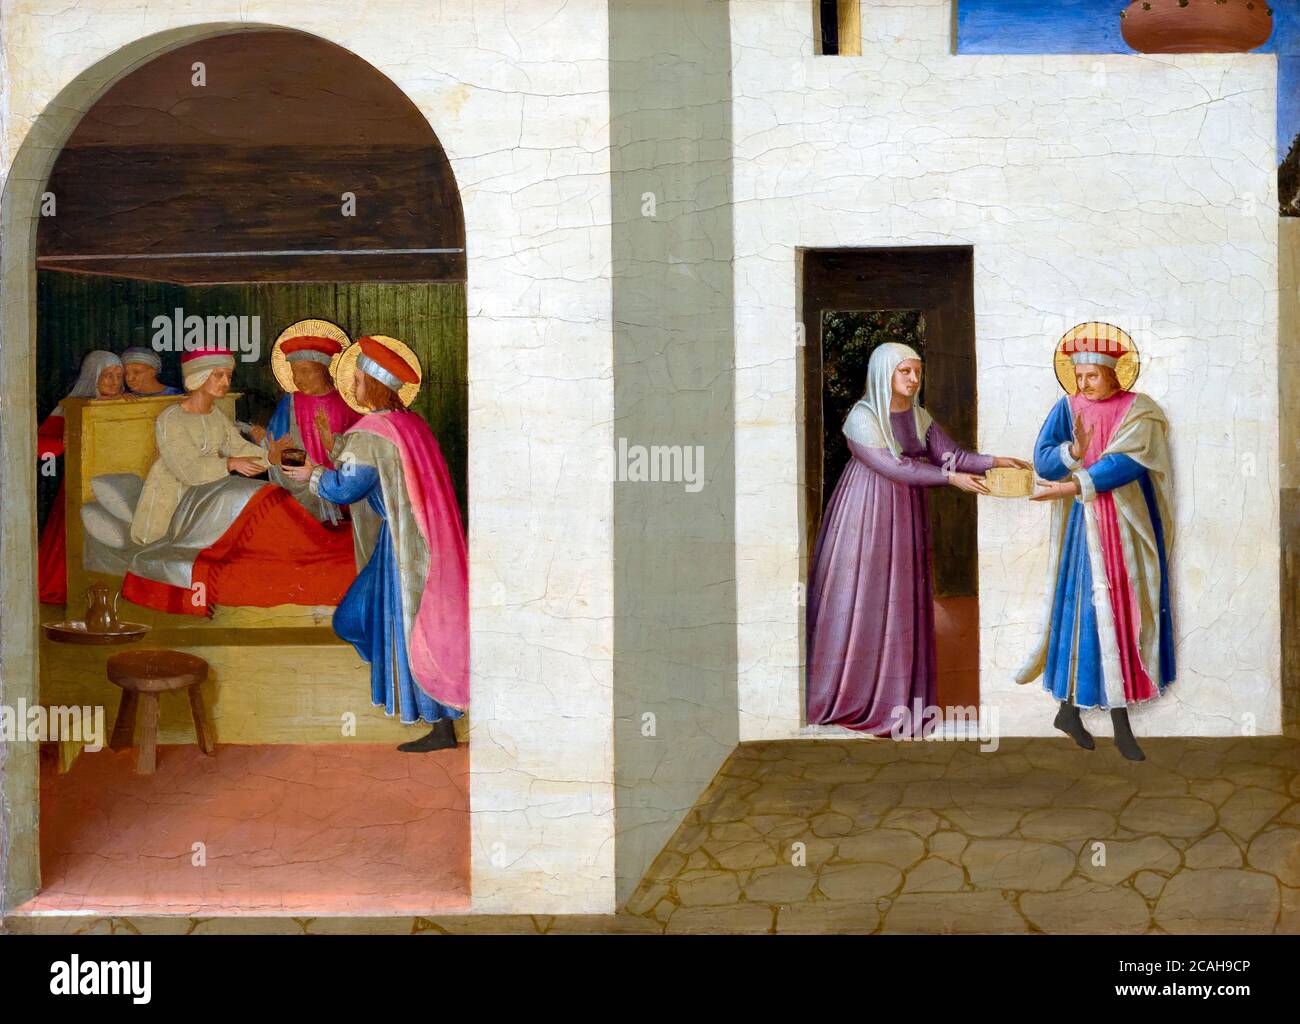 The Healing of Palladia by Saint Cosmos and Saint Damian, Fra Angelico, circa 1440, National Gallery of Art, Washington DC, USA, North America Stock Photo